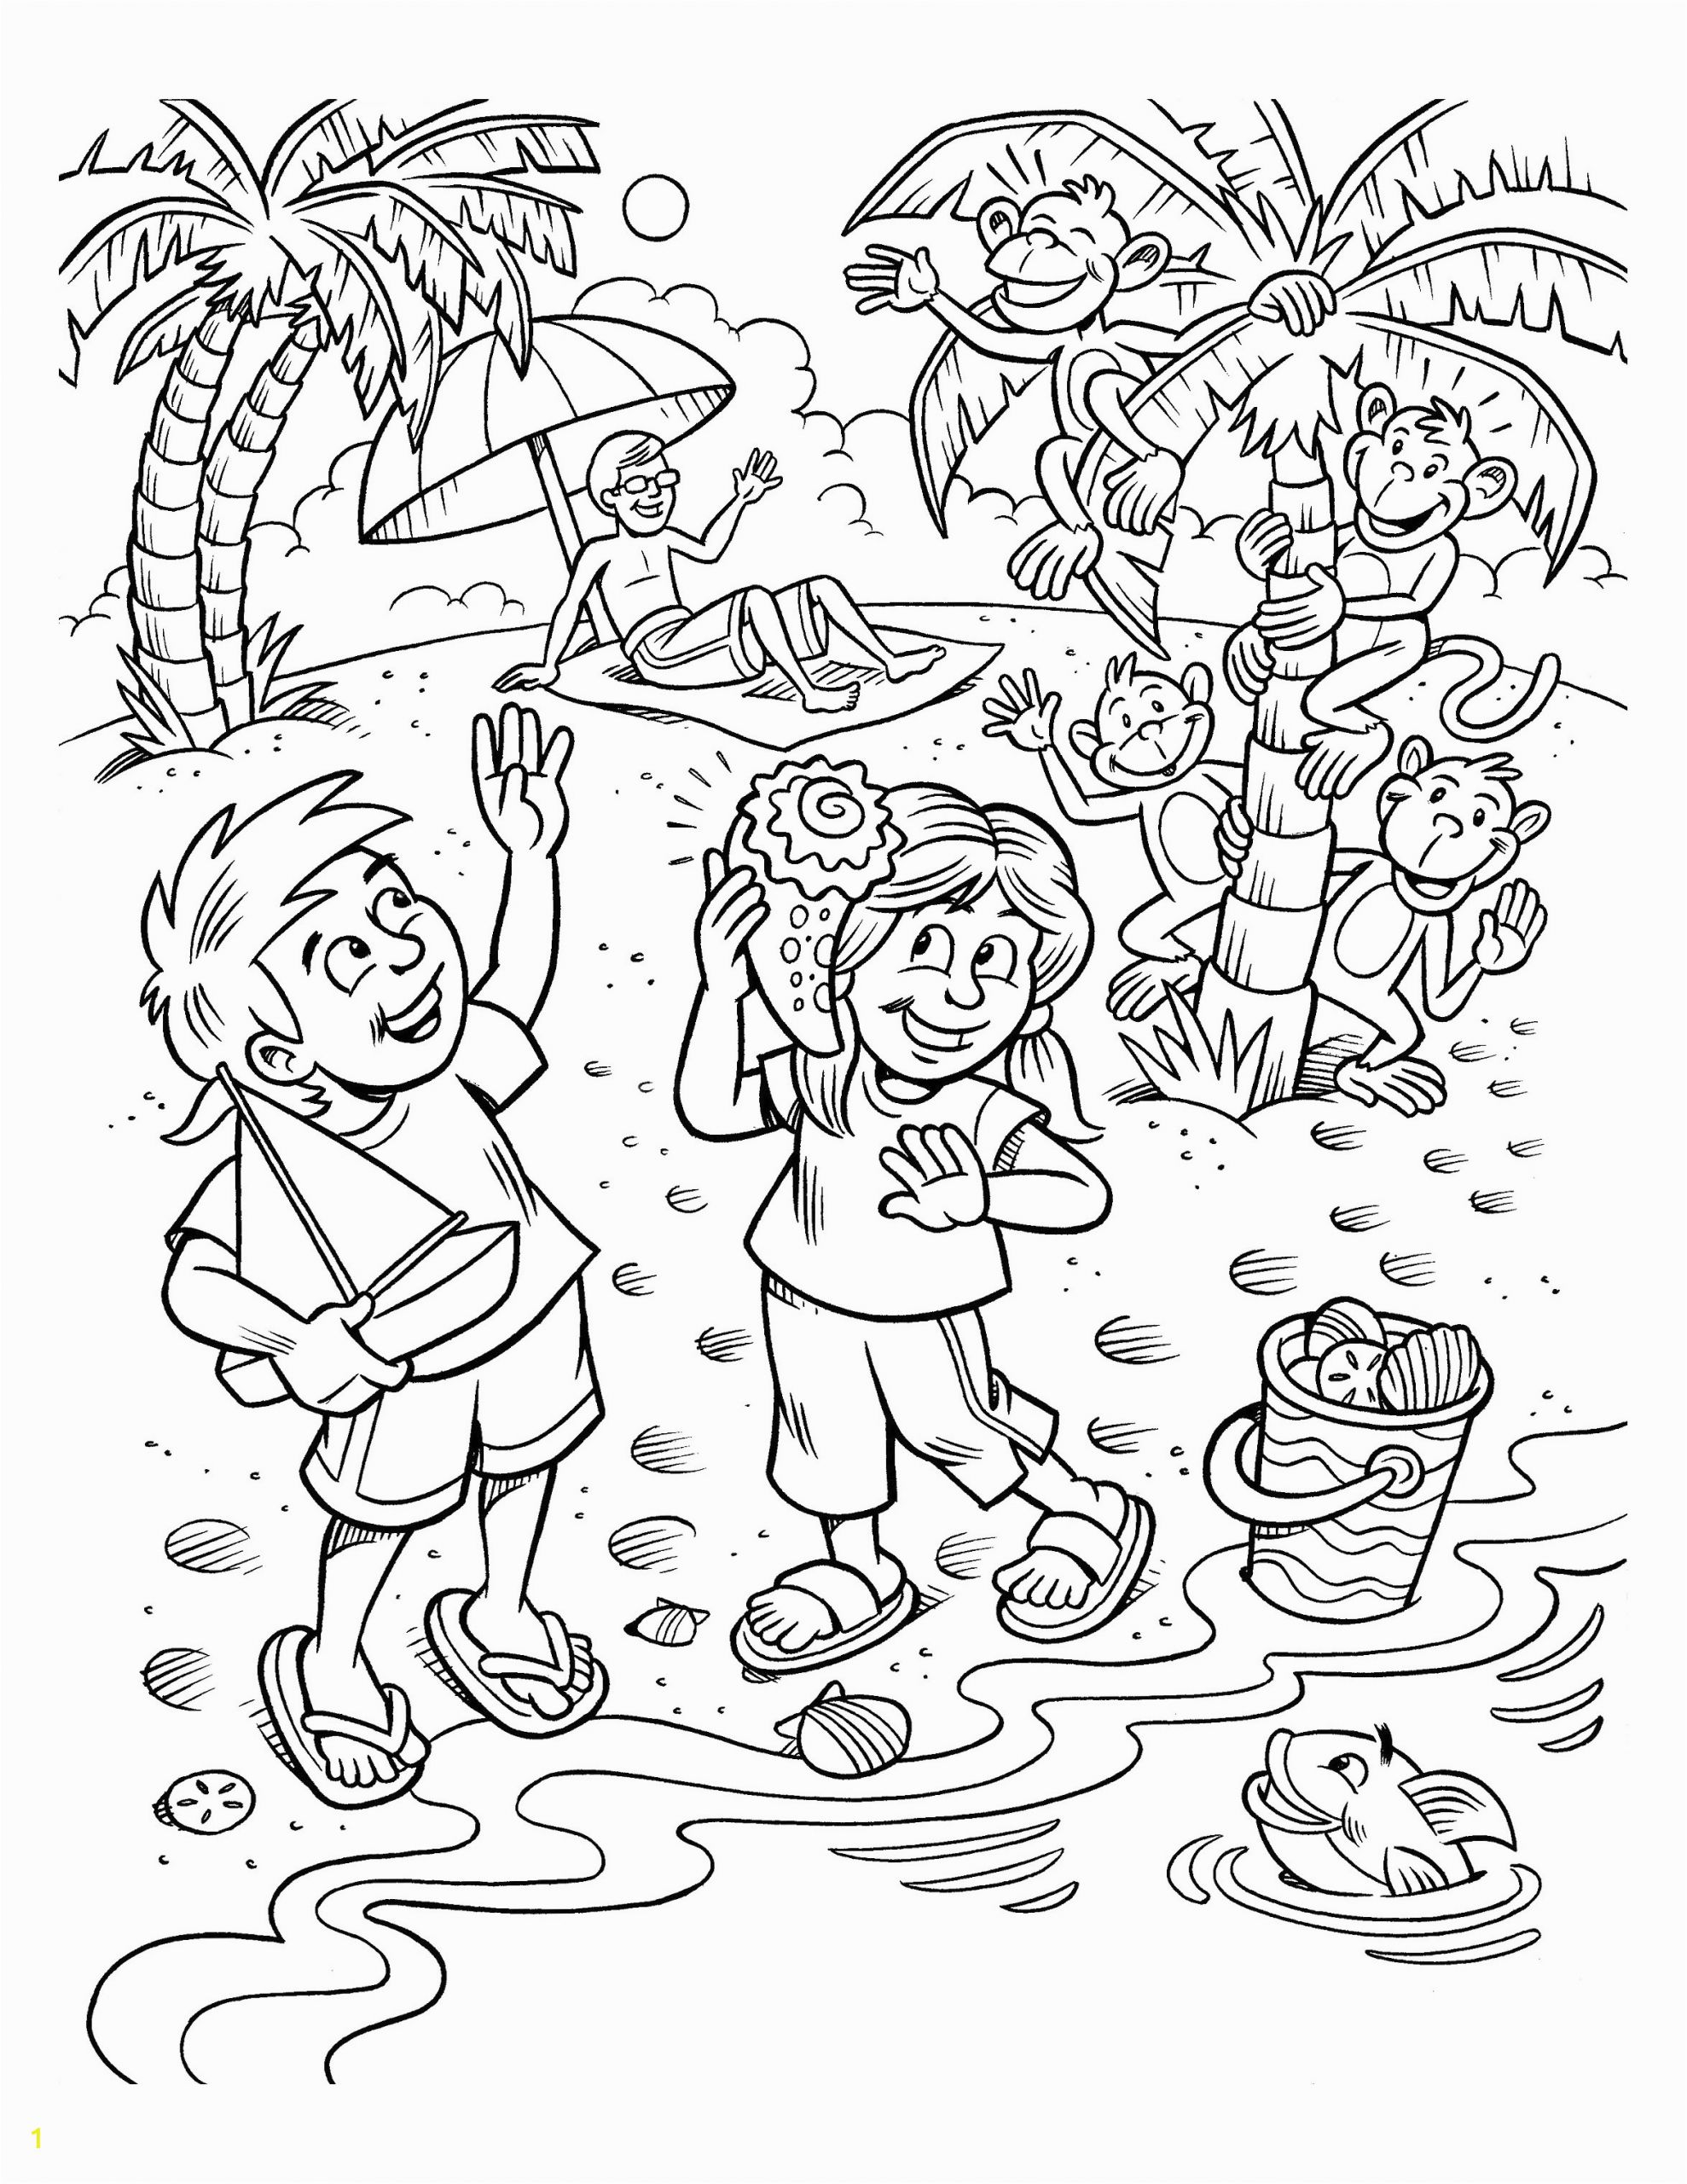 Coloring by Number for Elderly Coloring Pages—general